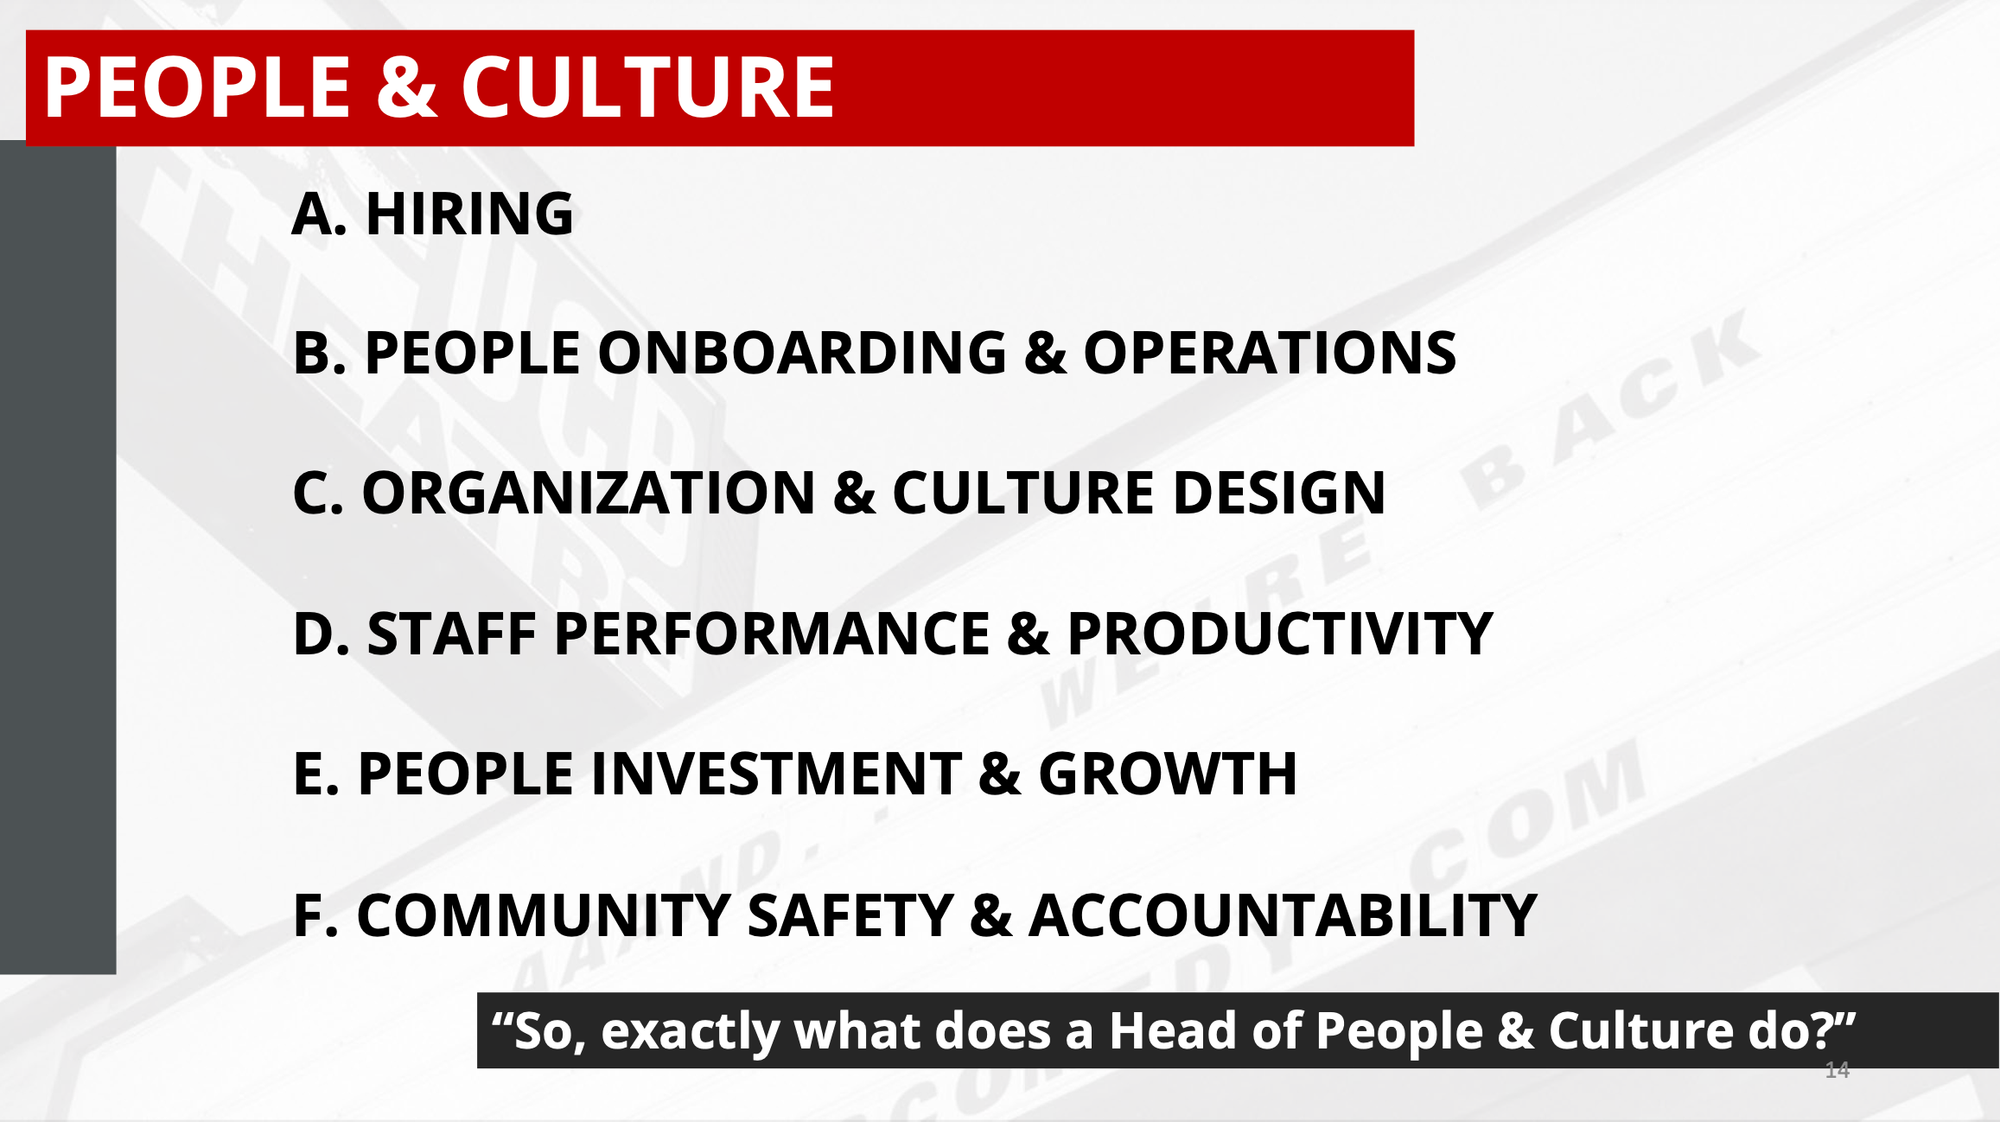 Slide deck w/ header "People & Culture" and footer "So, what exactly does a Head of People & Culture do?" A list in between describes the focus areas included in the above paragraph.